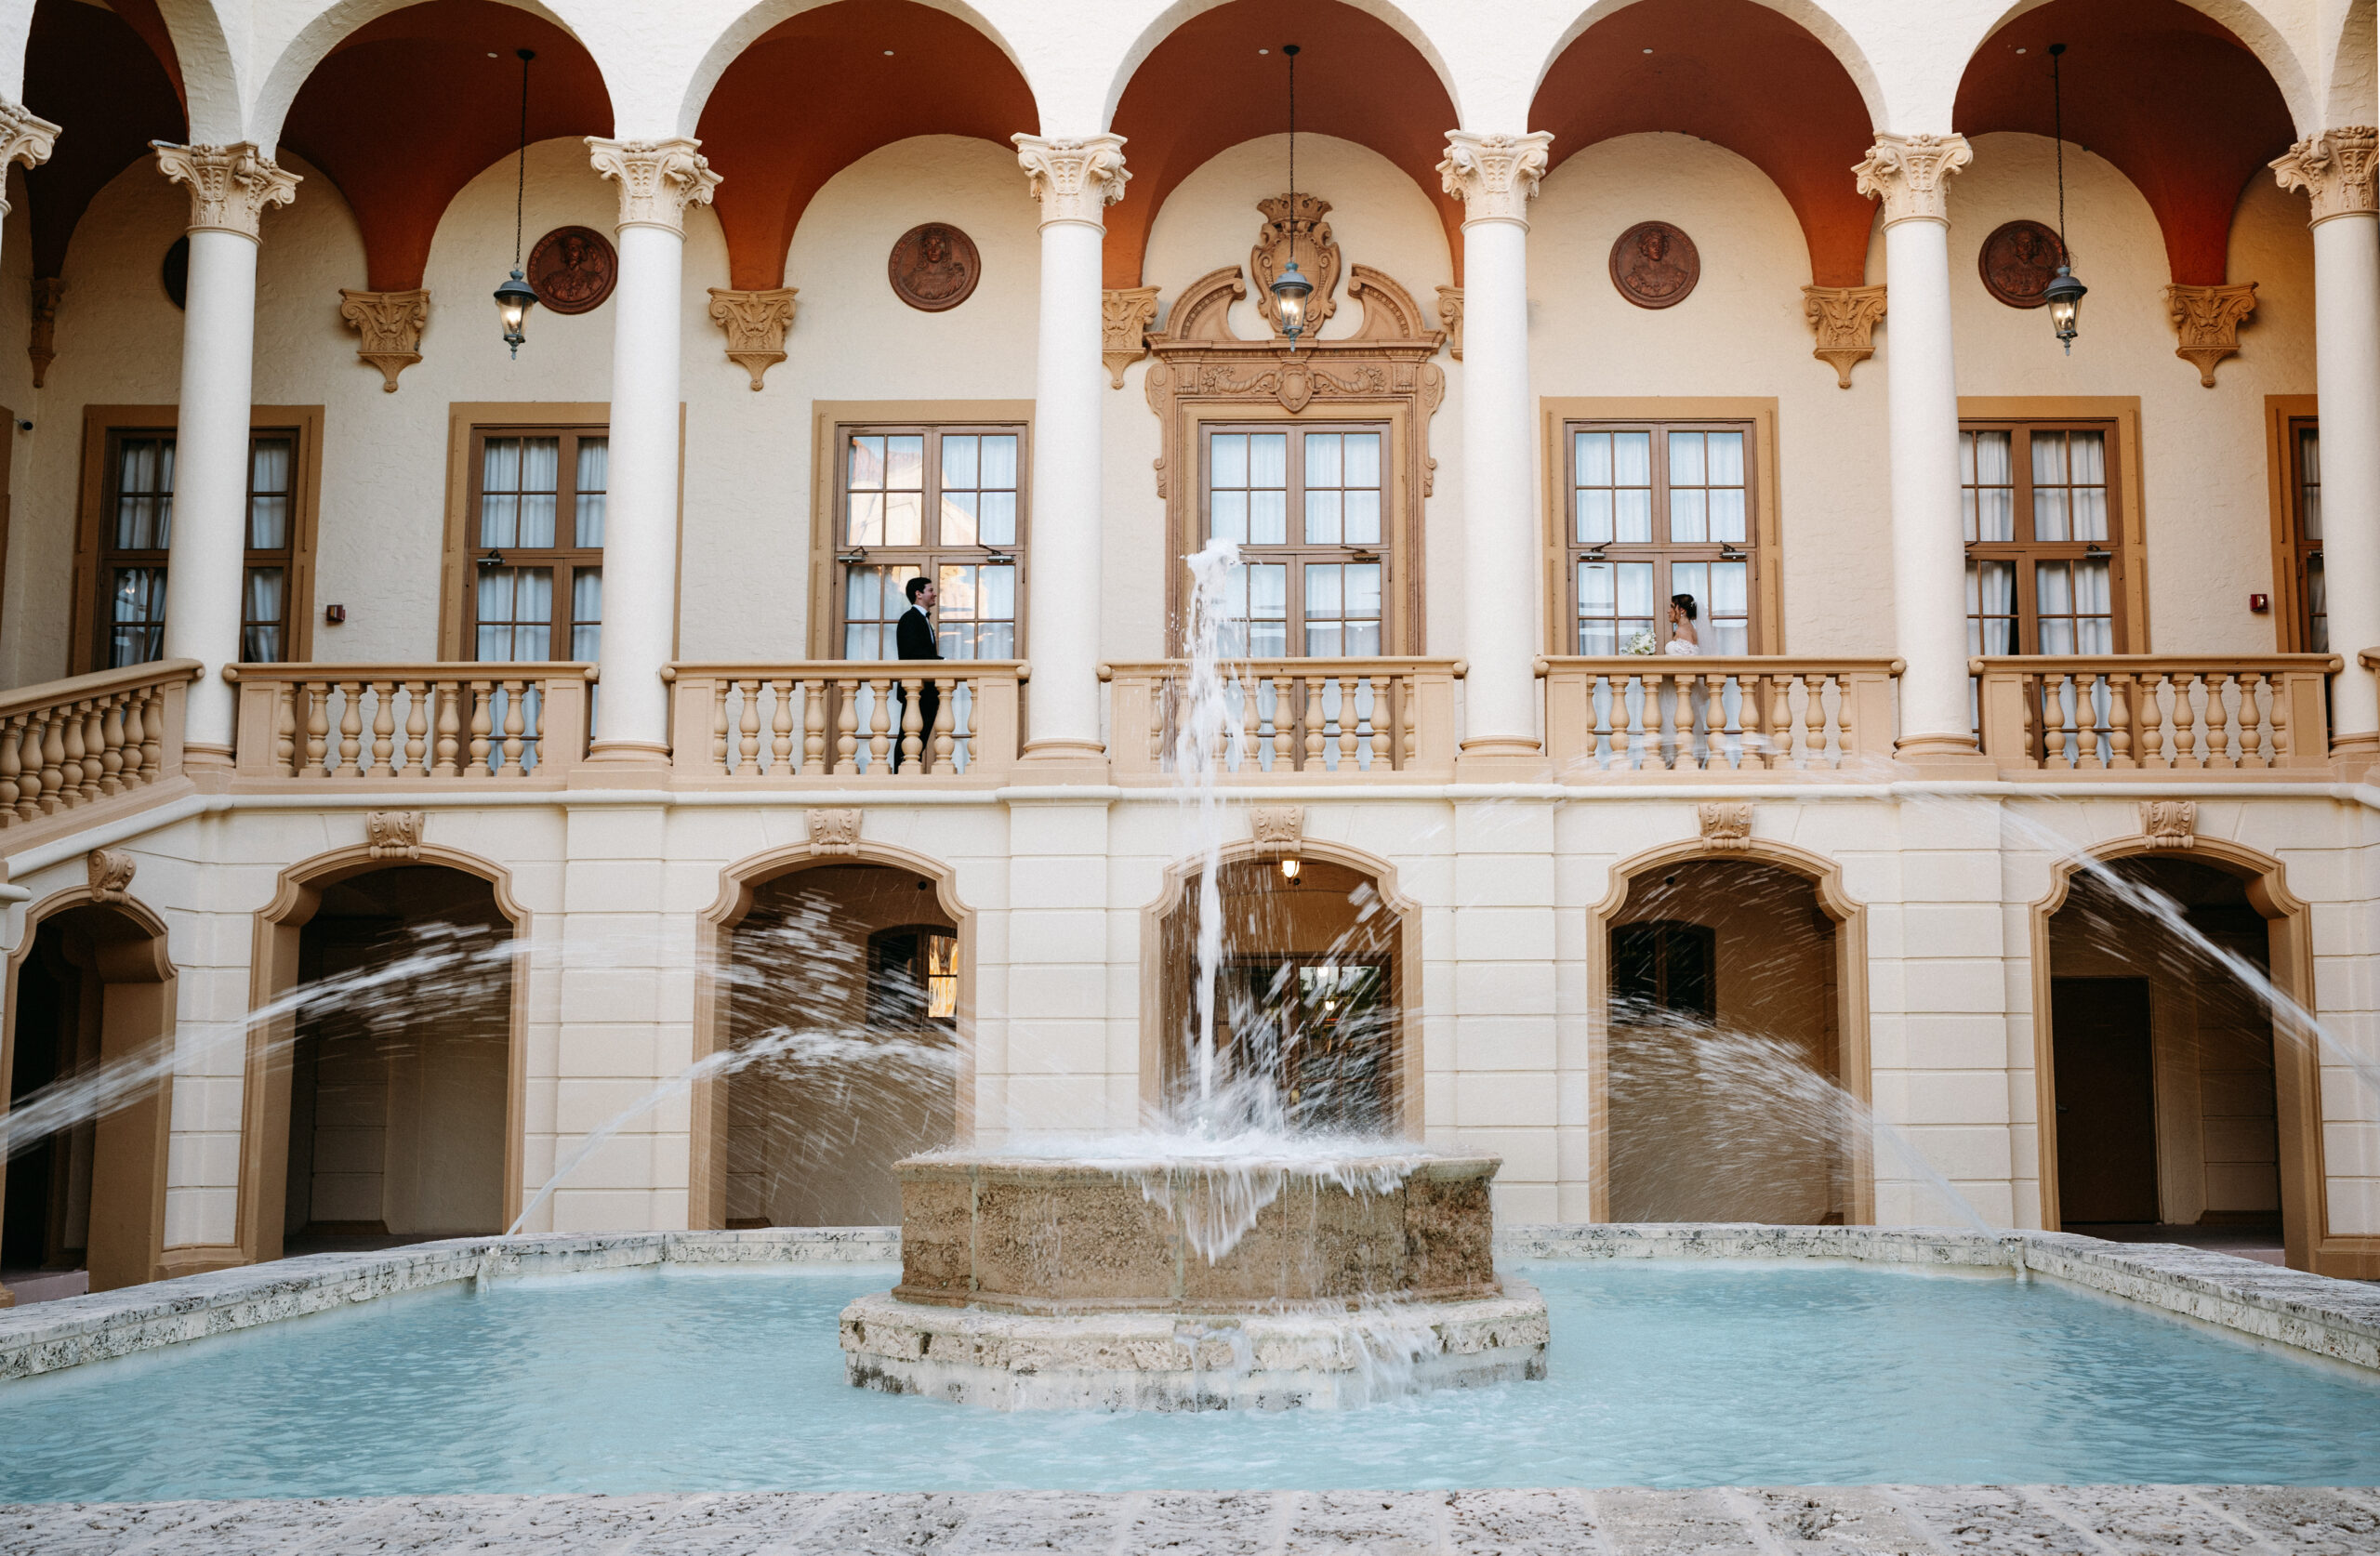 Couples bridal portraits on balcony overlooking iconic water fountain at Biltmore Hotel in Coral Gables.